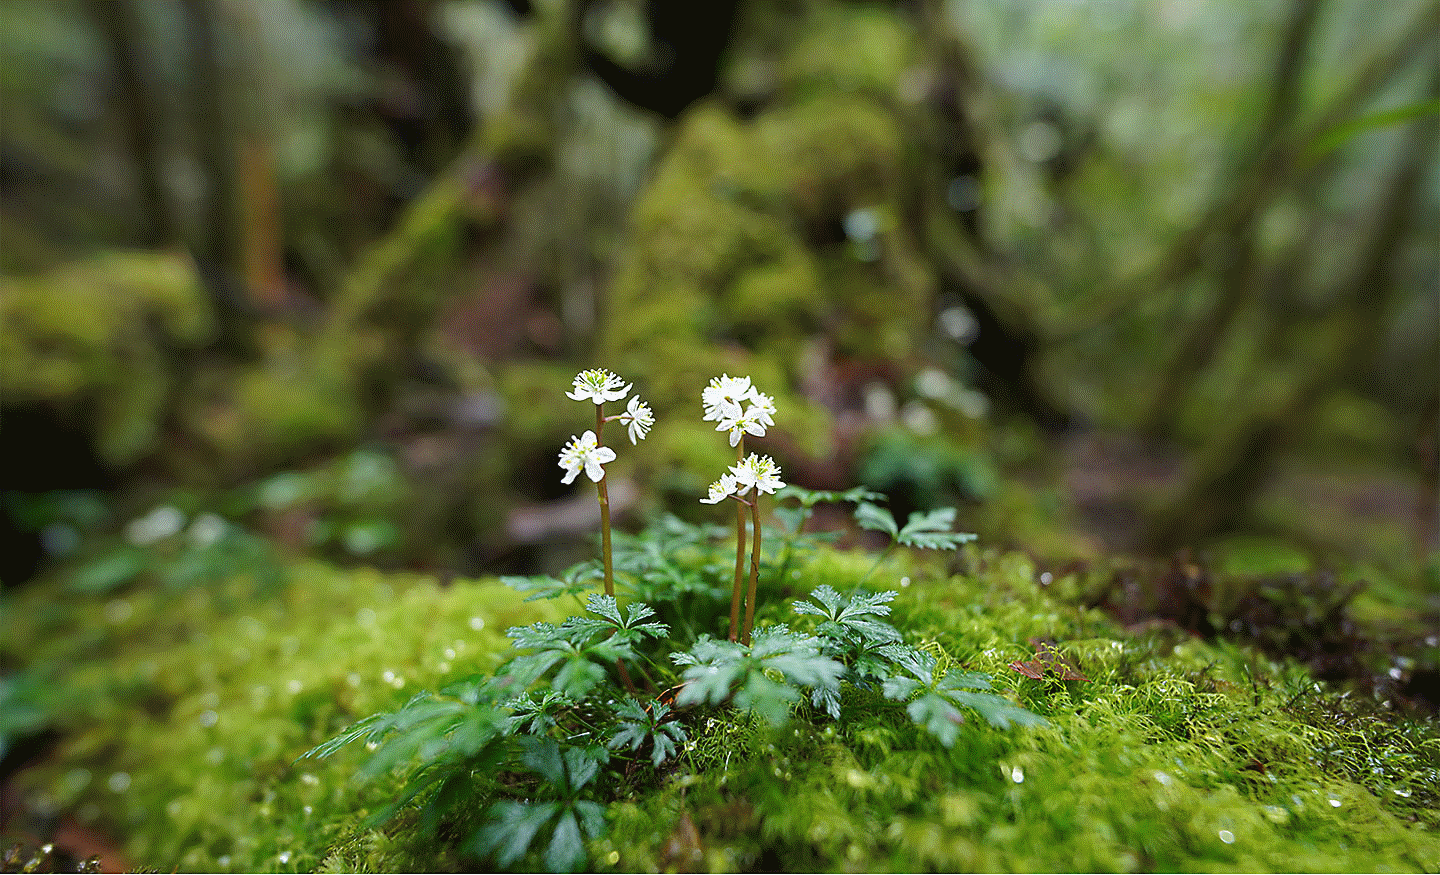 Image of a small flower on a rock in the forest, in focus, with a large blur in front and behind